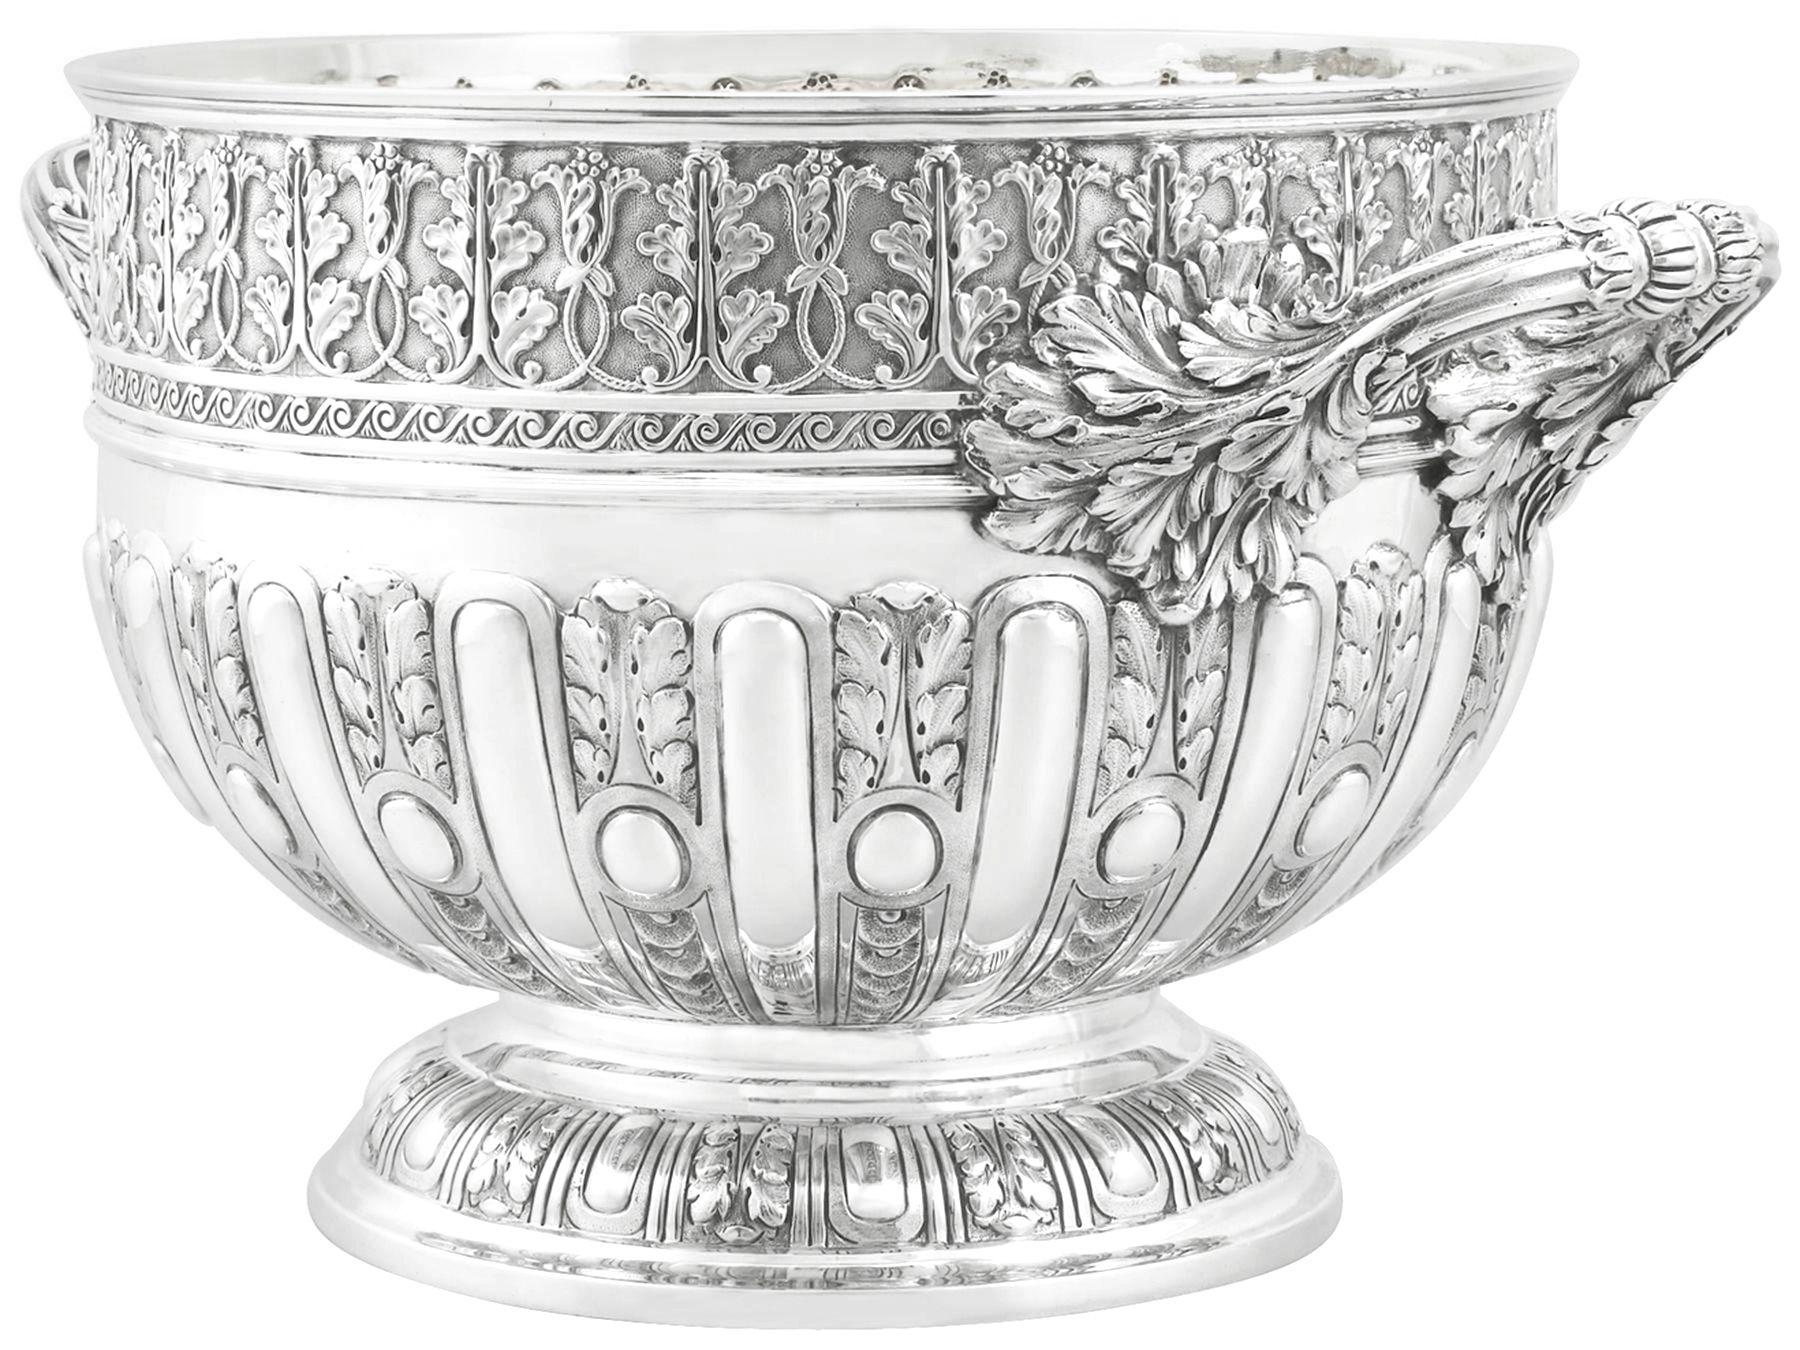 Antique Victorian Sterling Silver Presentation Bowl by Mappin & Webb In Excellent Condition For Sale In Jesmond, Newcastle Upon Tyne